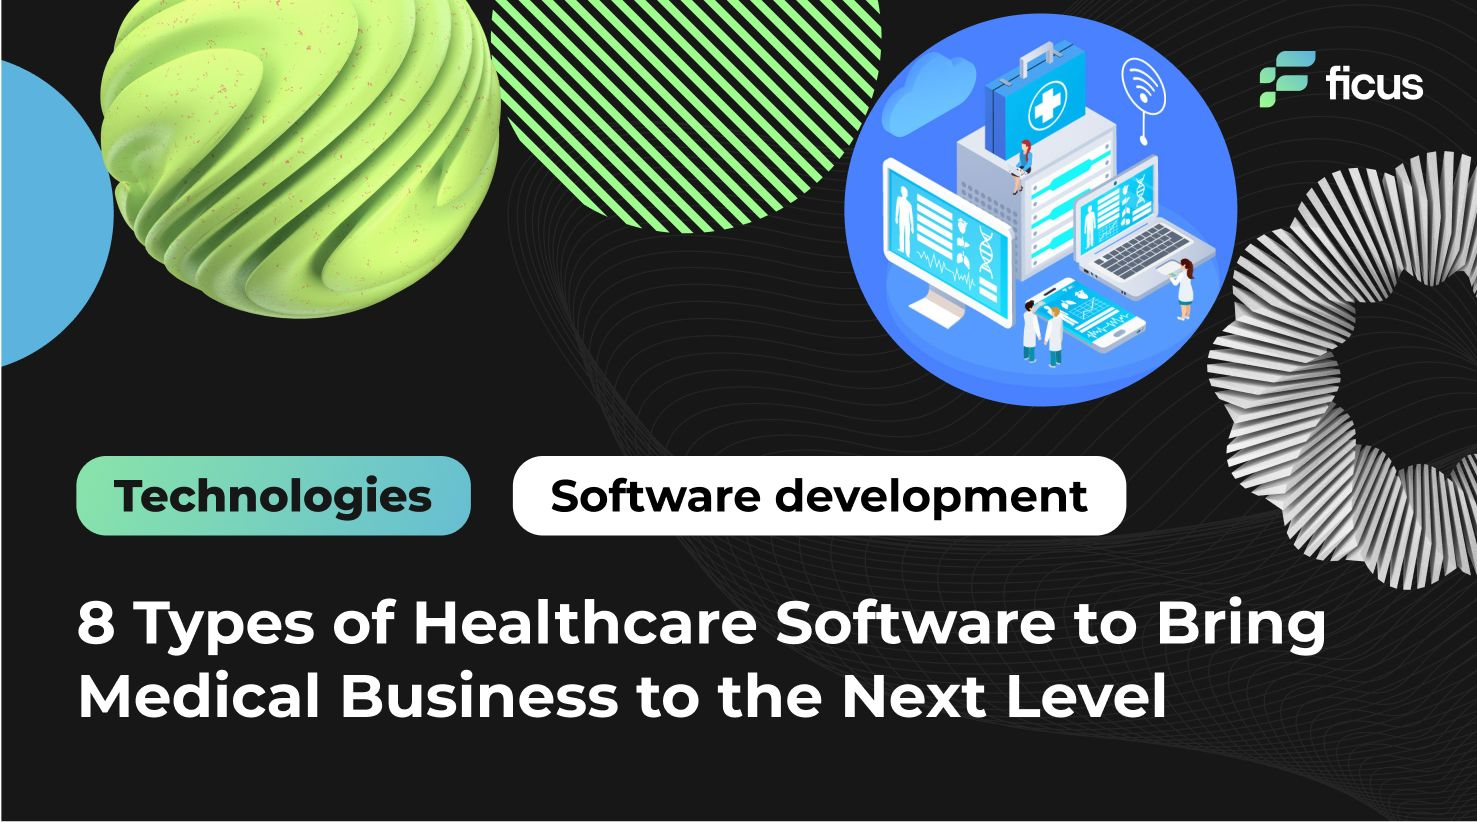 8 Types of Healthcare Software to Bring Medical Business to the Next Level